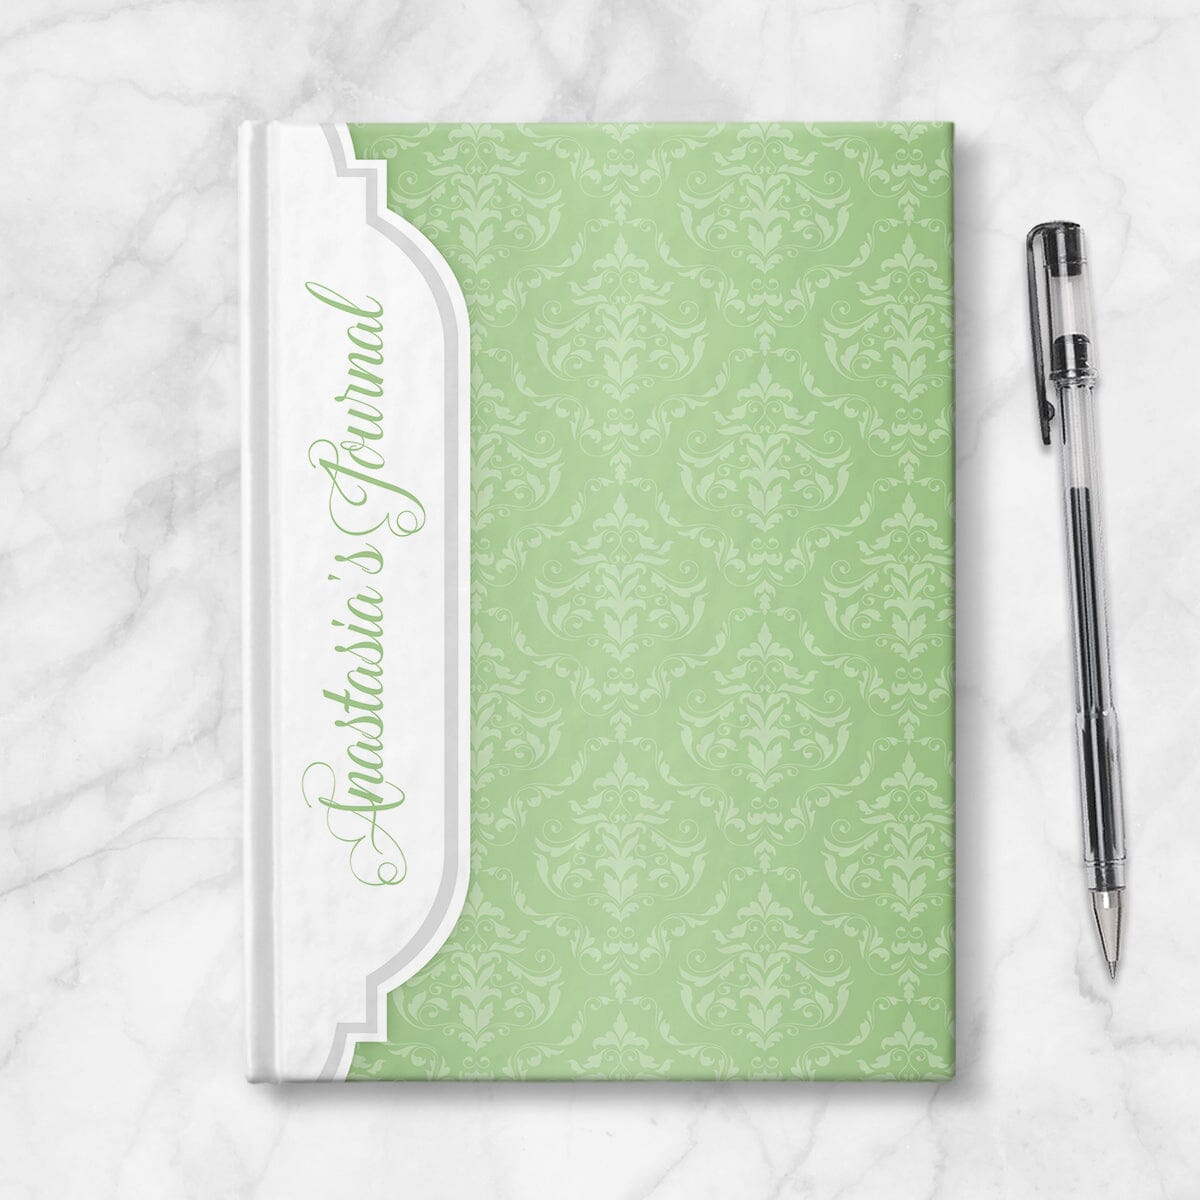 Personalized Green Damask Journal at Artistically Invited. Image shows the book on a countertop next to a pen.